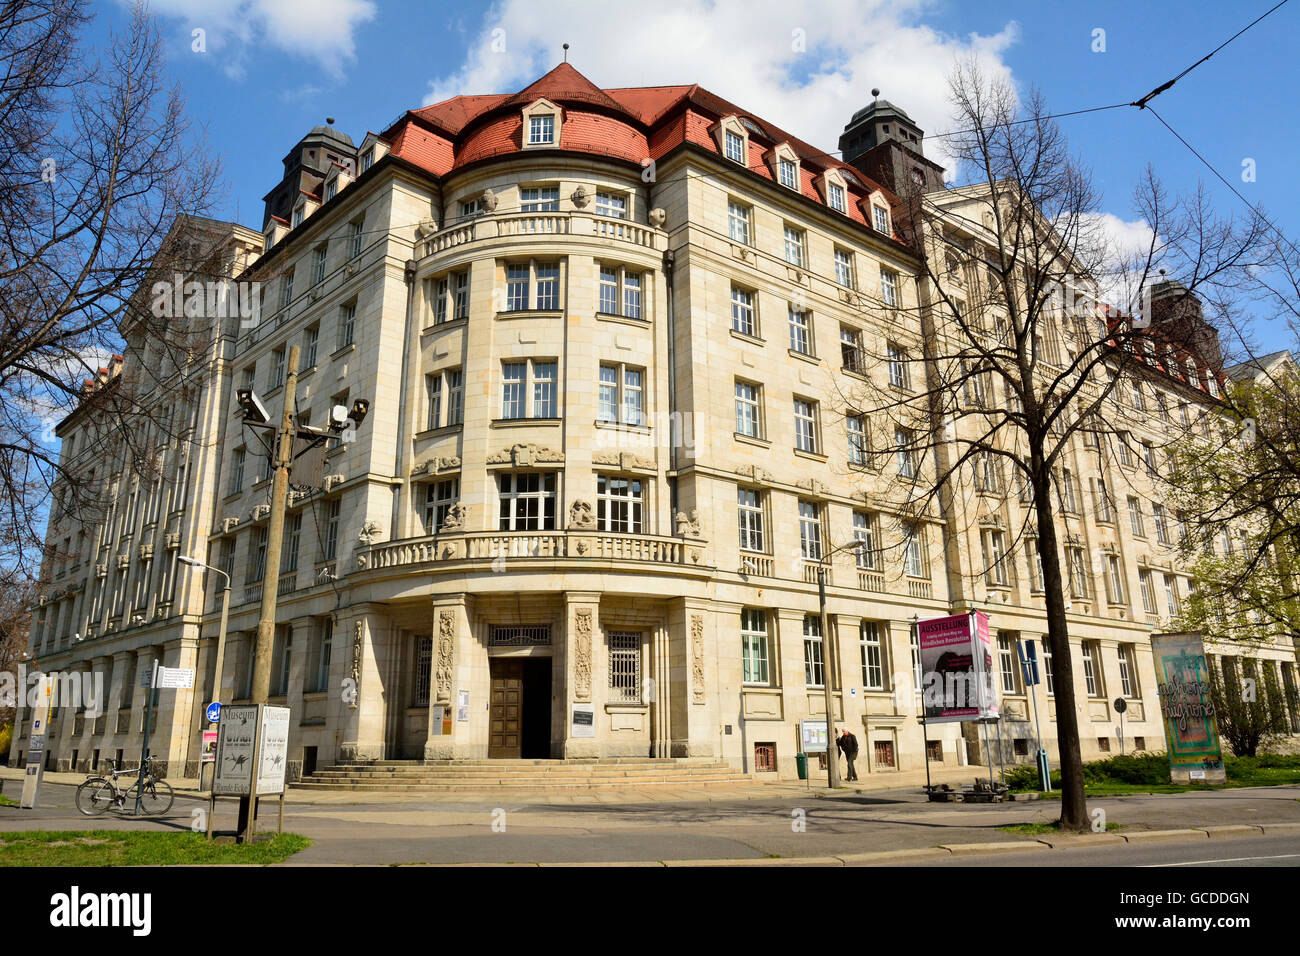 The Runde Ecke building on Dittrichring street, Leipzig, Germany Stock Photo